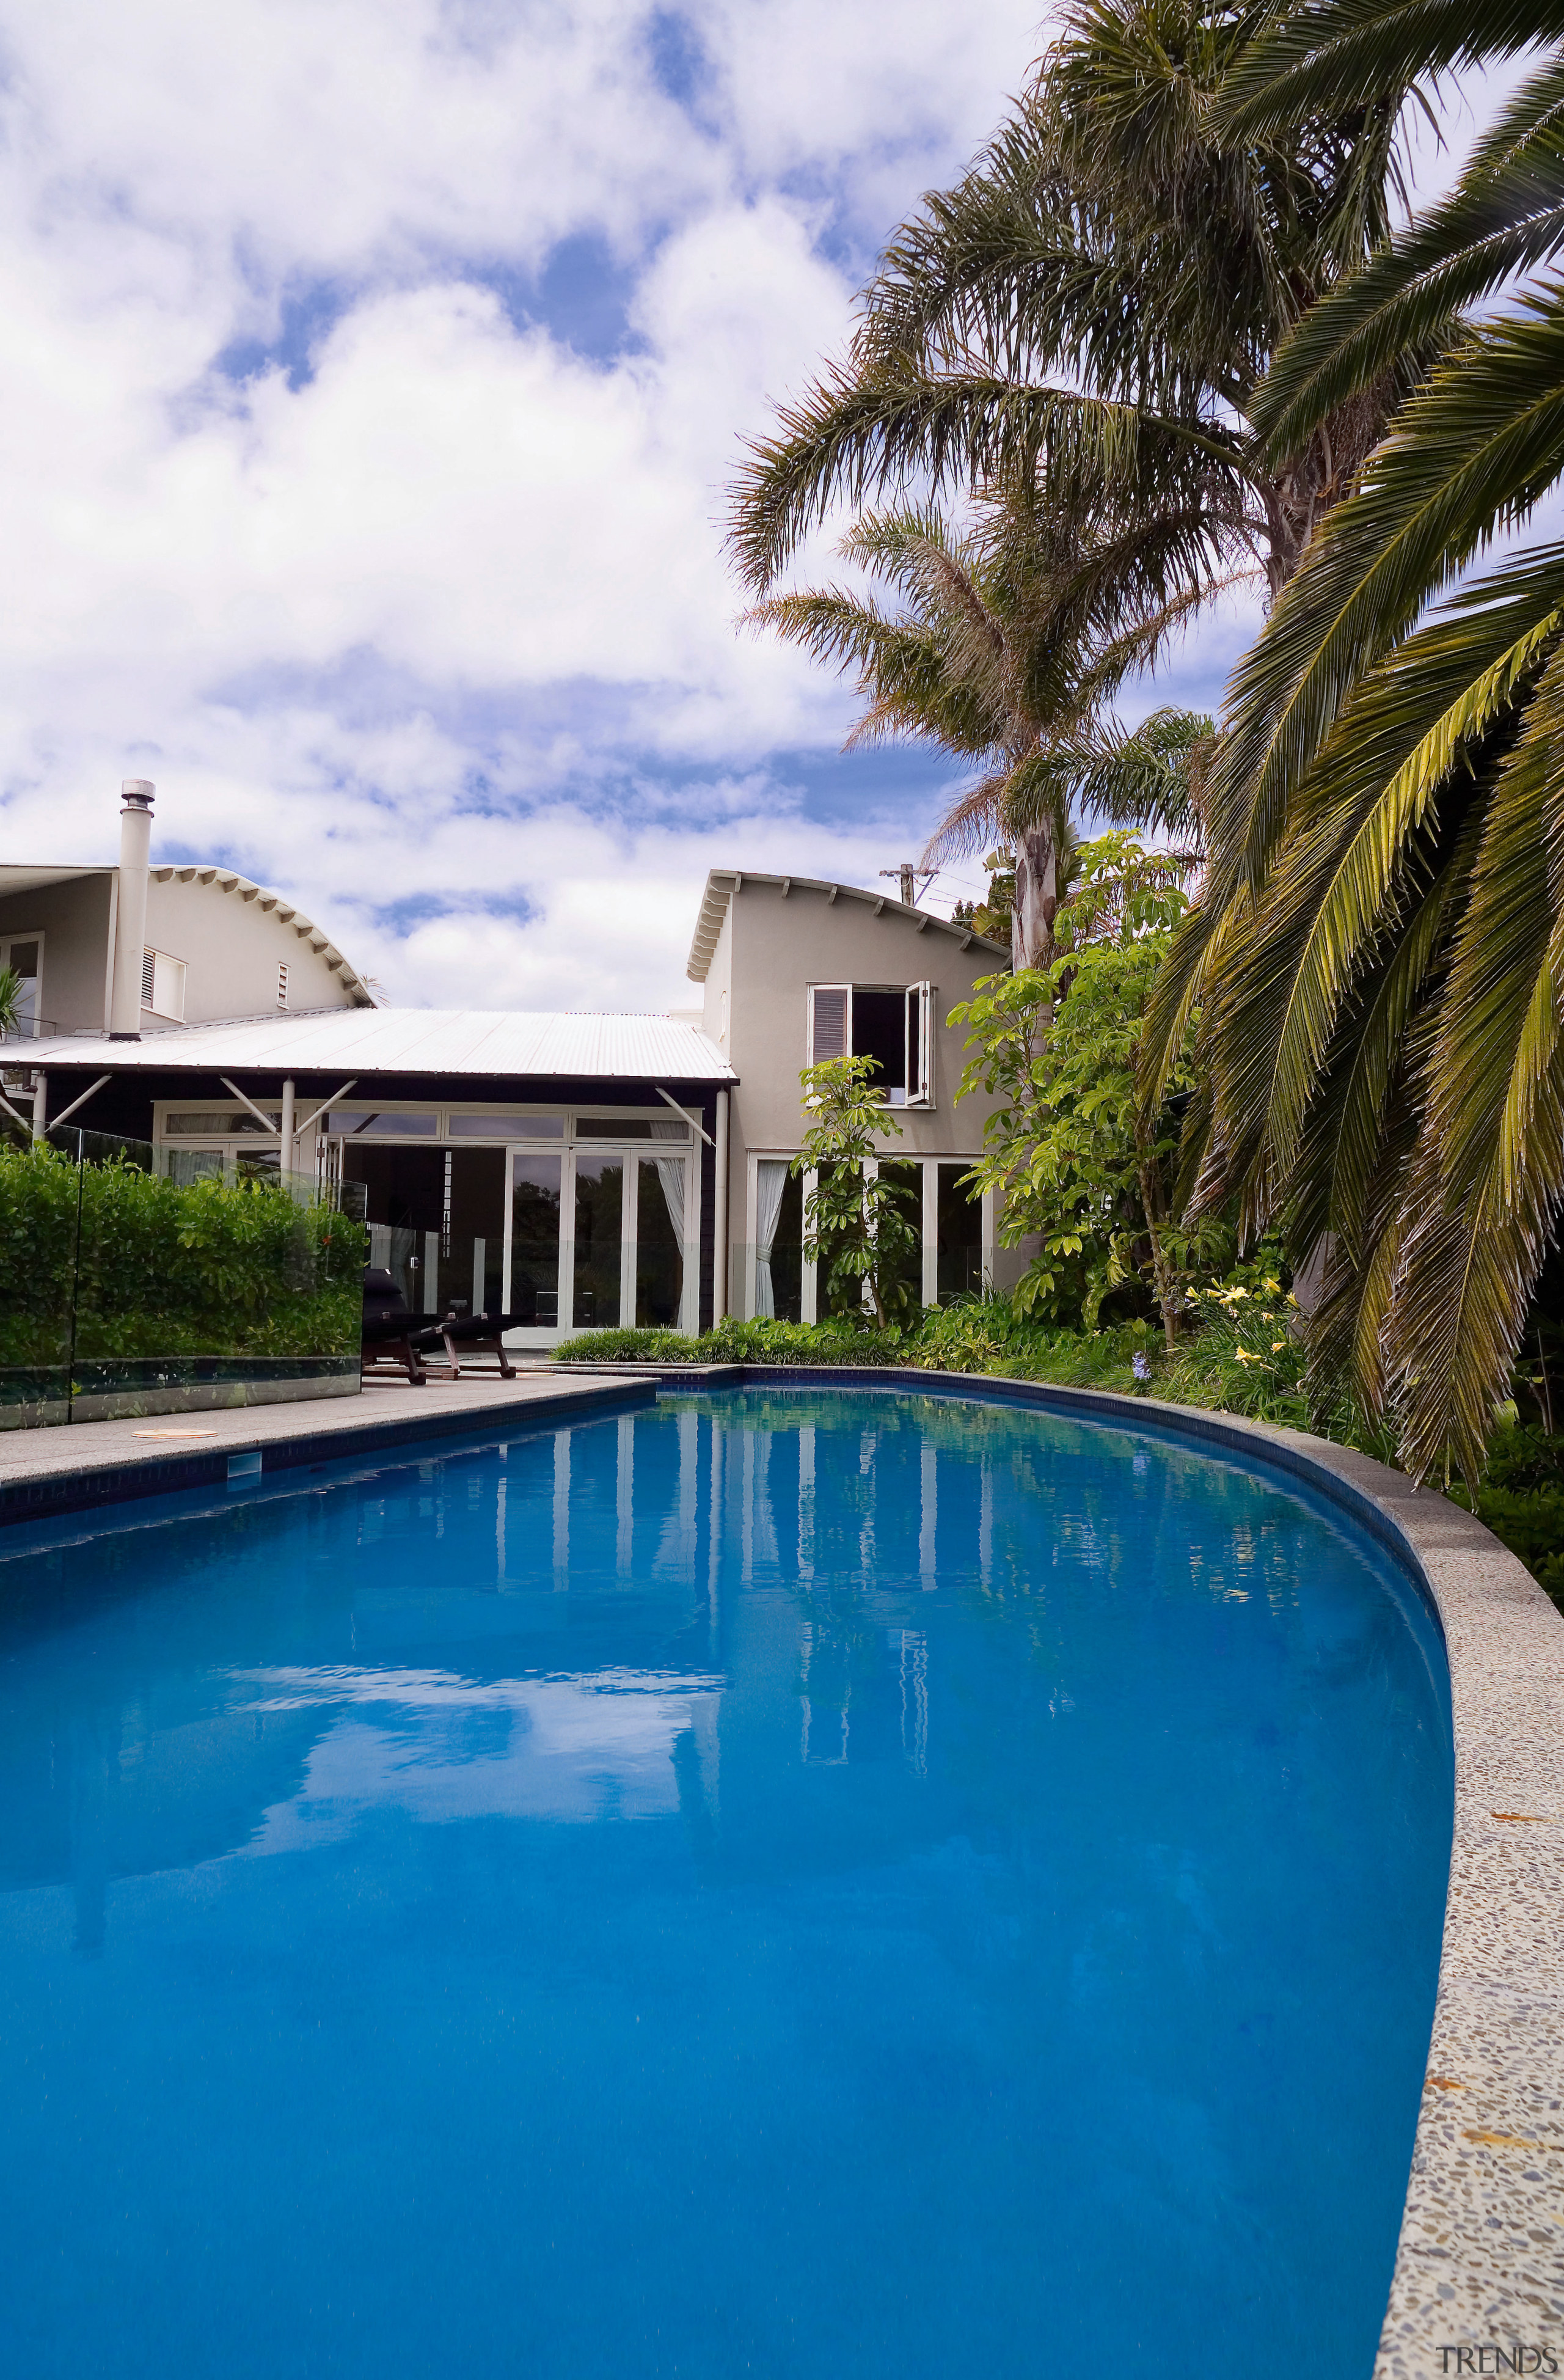 The owners of this 1990s home wanted a arecales, estate, hacienda, home, house, leisure, mansion, palm tree, property, real estate, reflection, resort, sky, swimming pool, tree, tropics, vacation, villa, water, blue